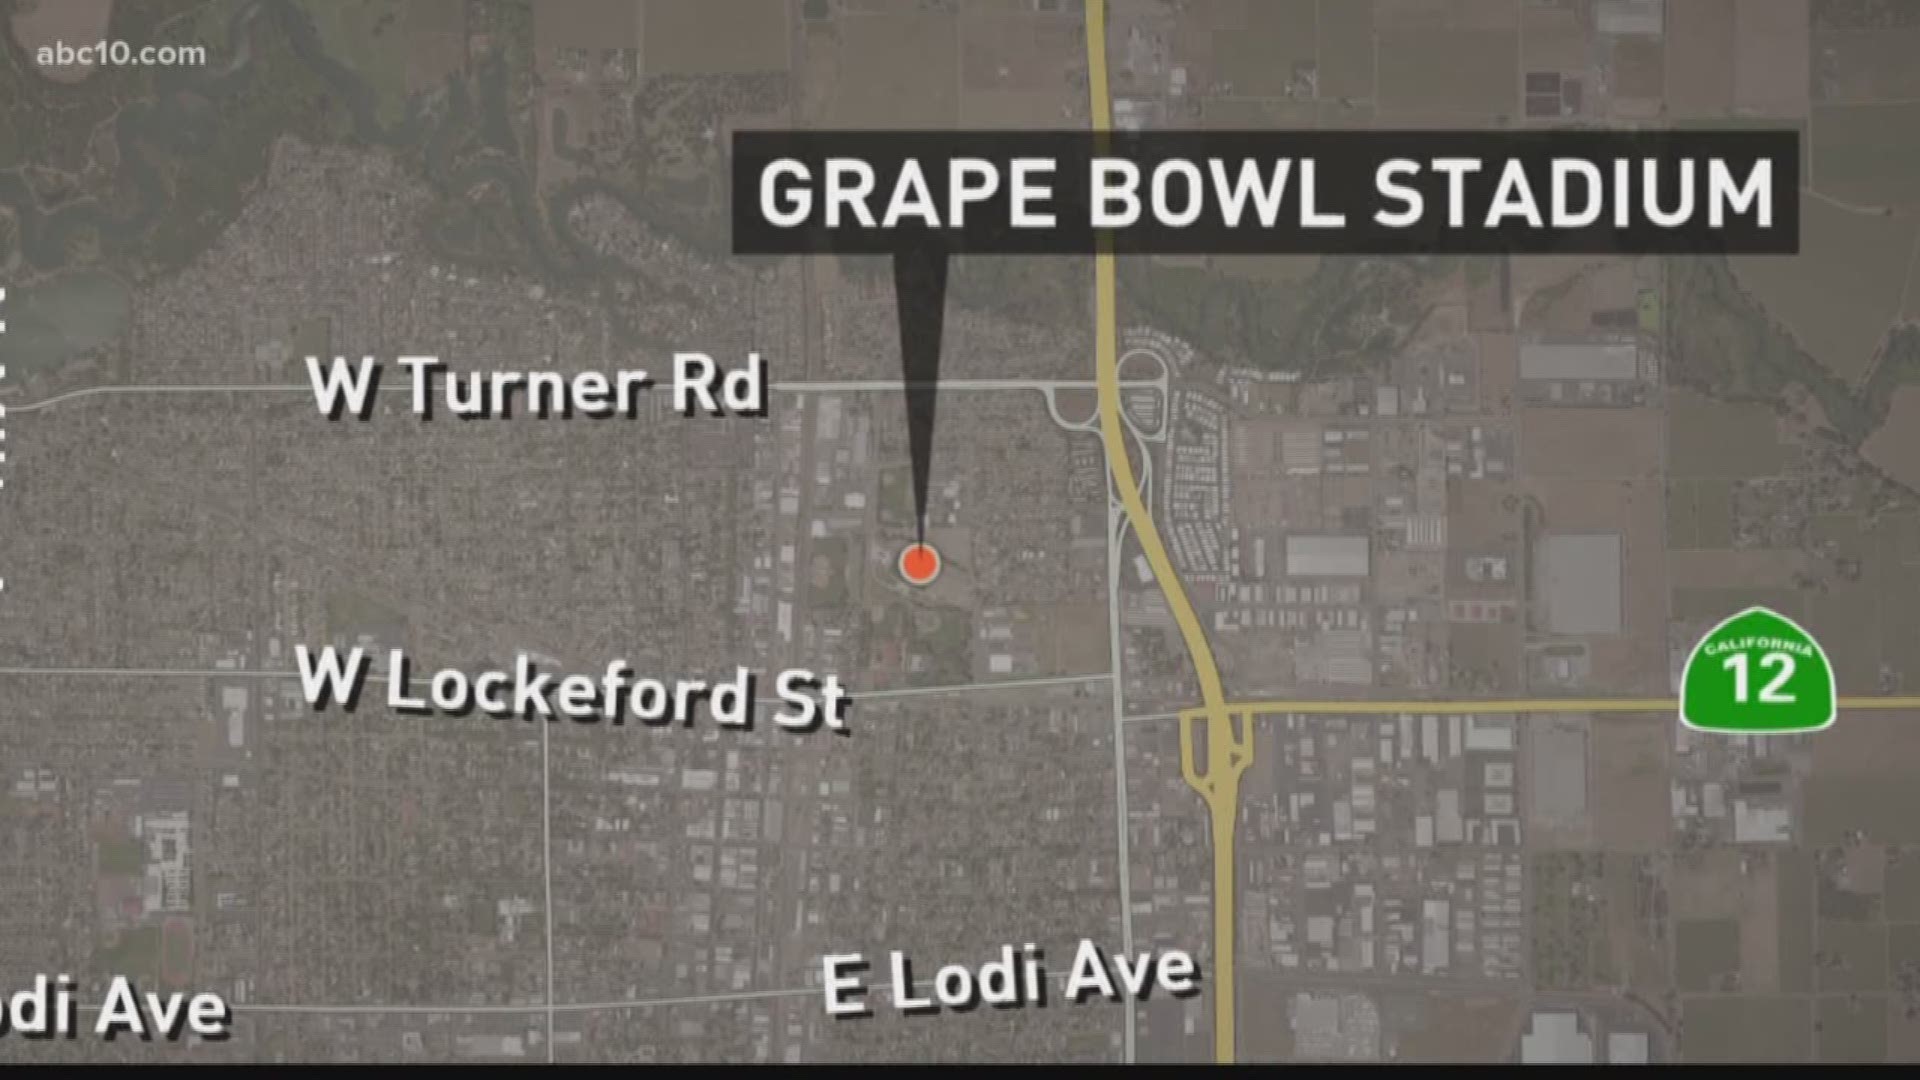 Five people were hurt in a 200-person brawl outside the Grape Bowl in Lodi on Saturday, according to the Lodi Police Department.